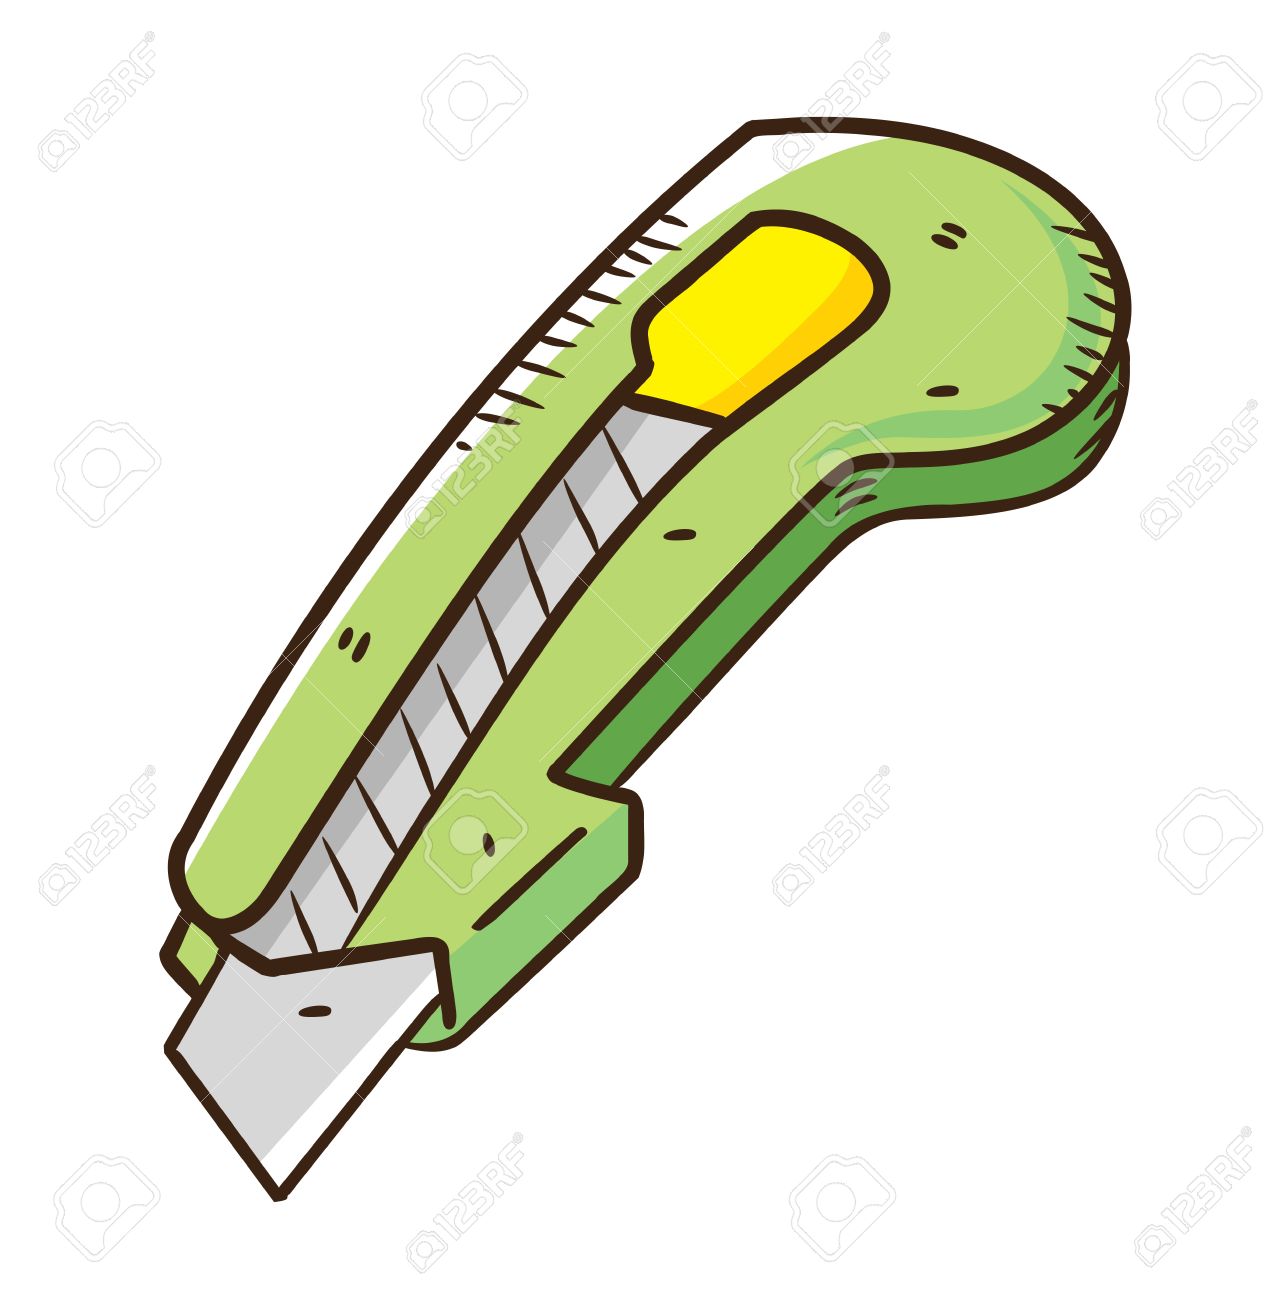 Cutter In Doodle Style Royalty Free Cliparts, Vectors, And Stock.